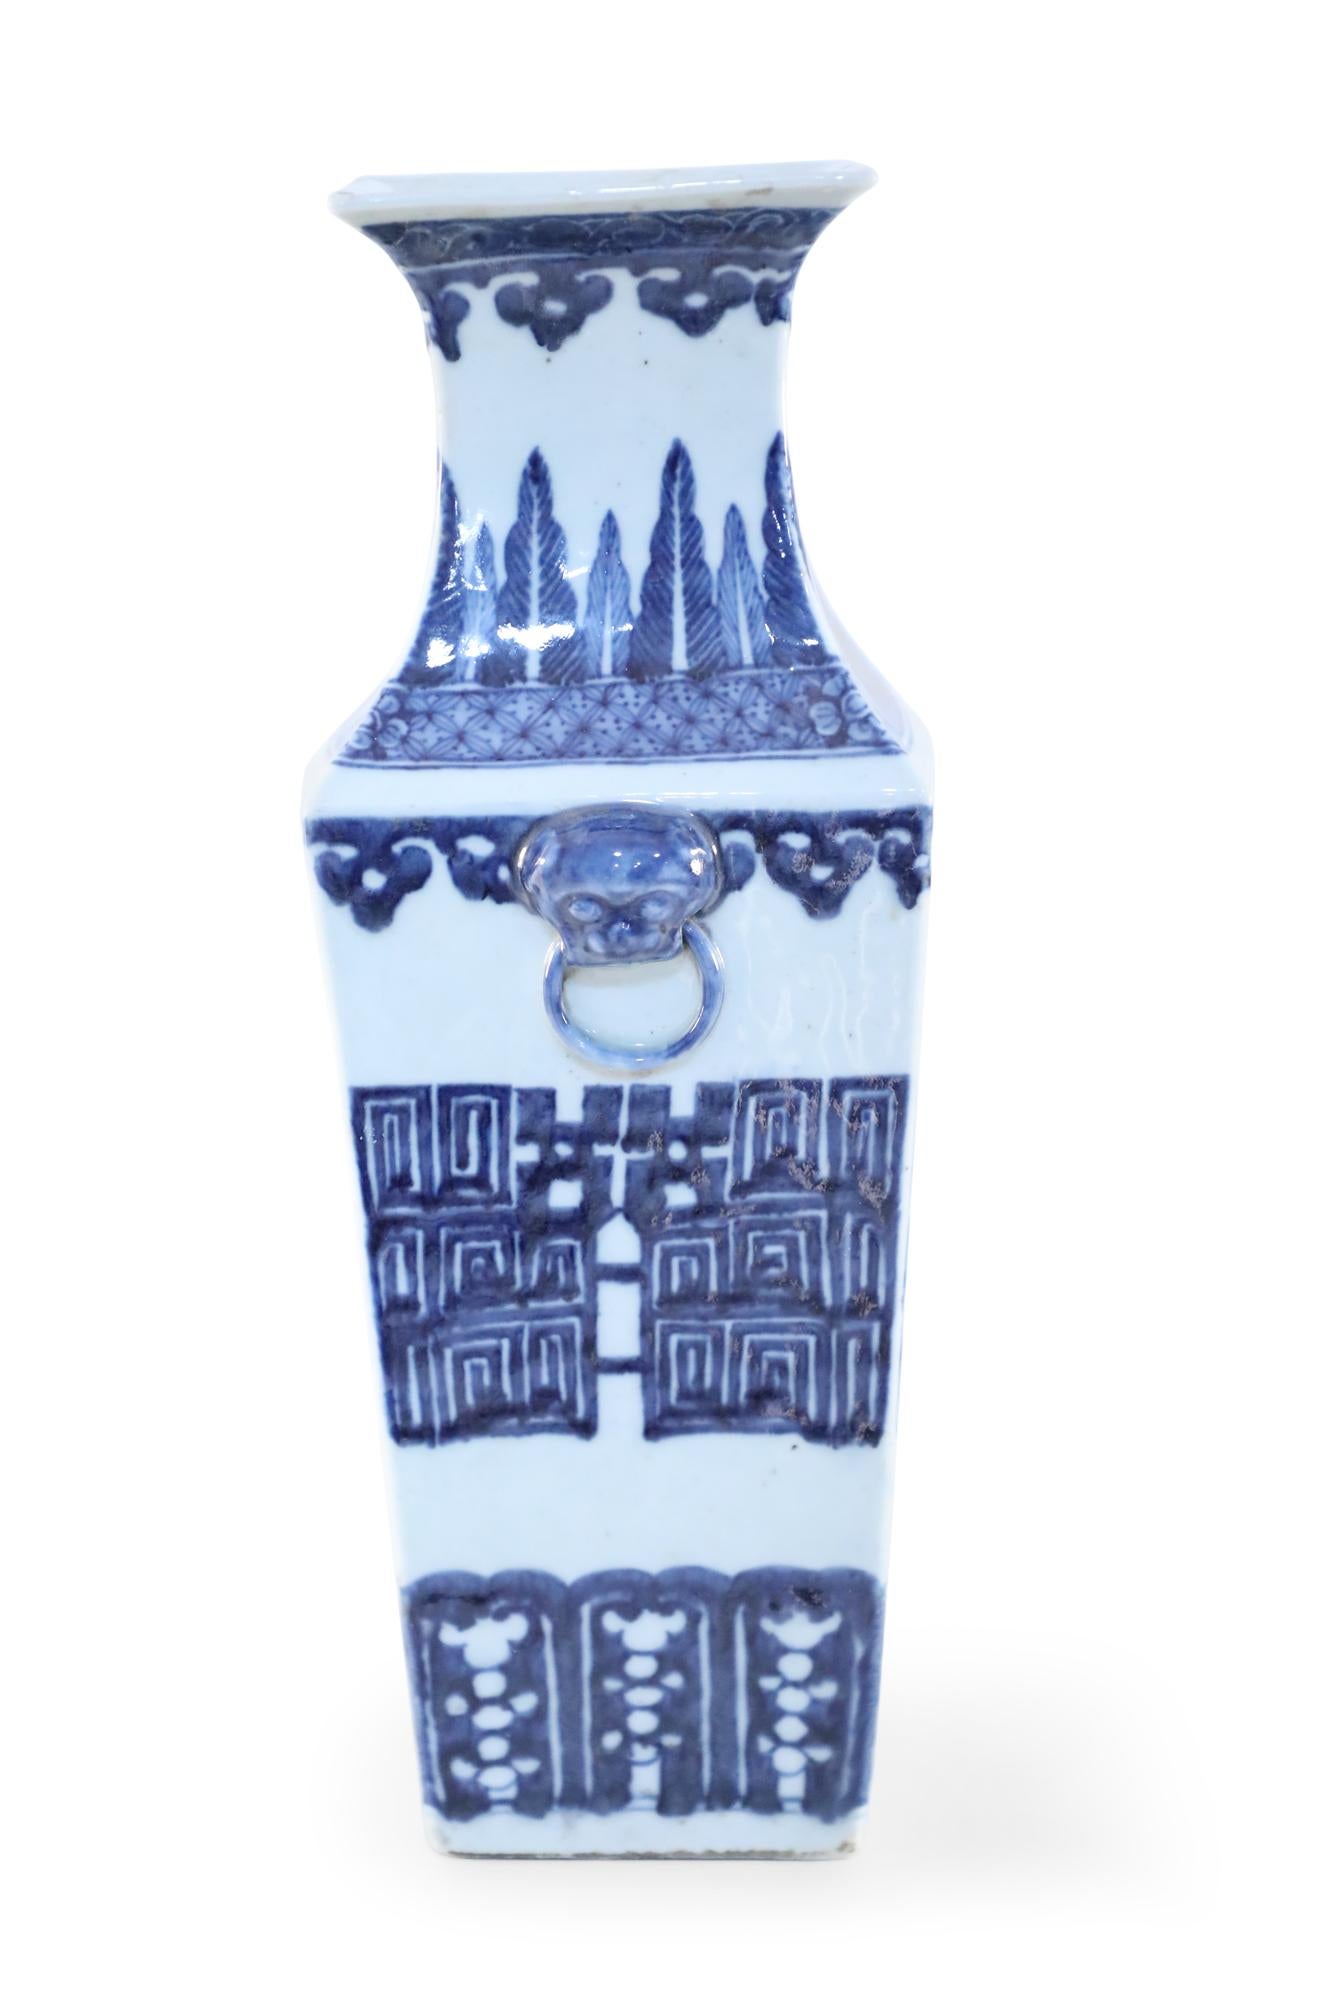 Antique Chinese (19th century) white ceramic vase with a squared form wrapped in dark blue geometric patterns, and adorned with blue foo dog door knockers on two sides.
    